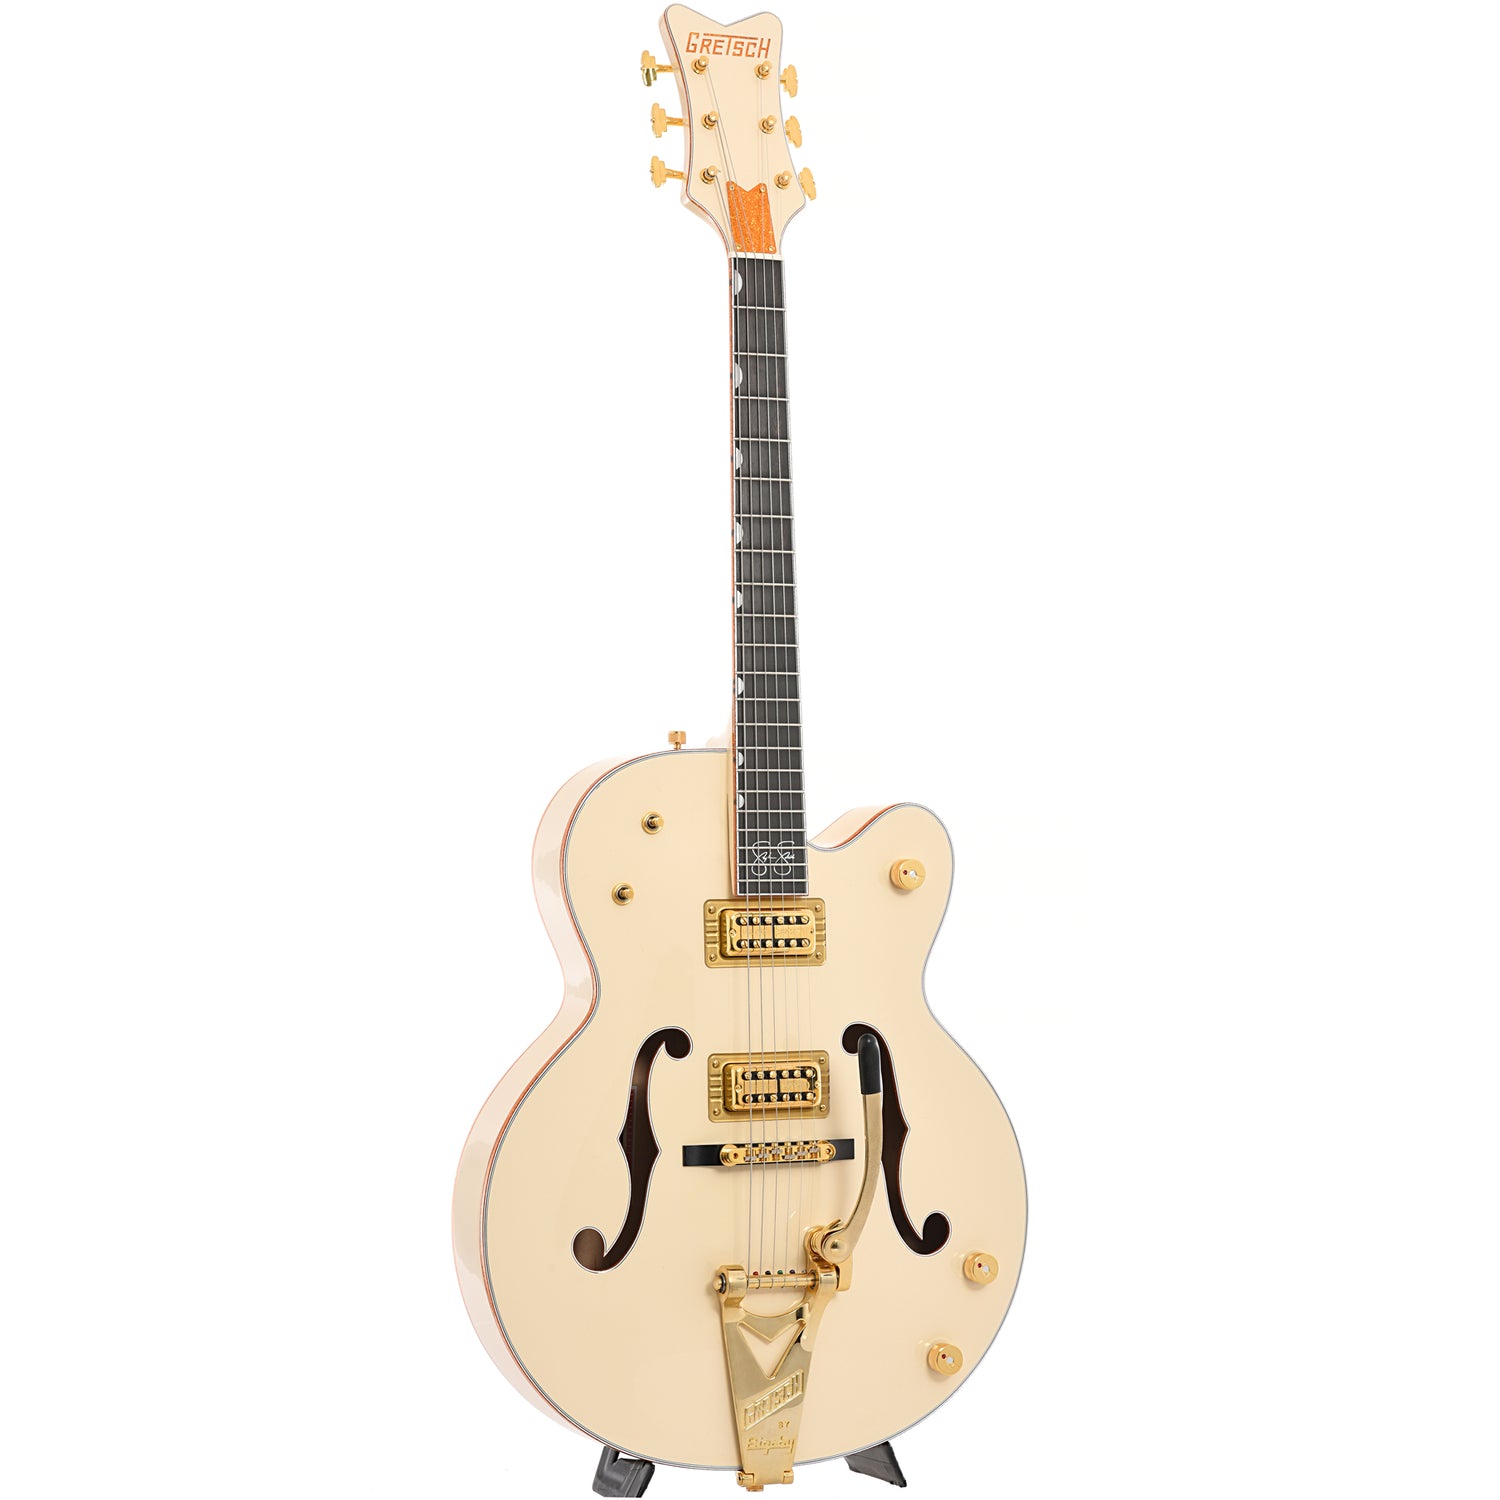 Full front and side of Gretsch Stephen Stills White Falcon Hollow Body 